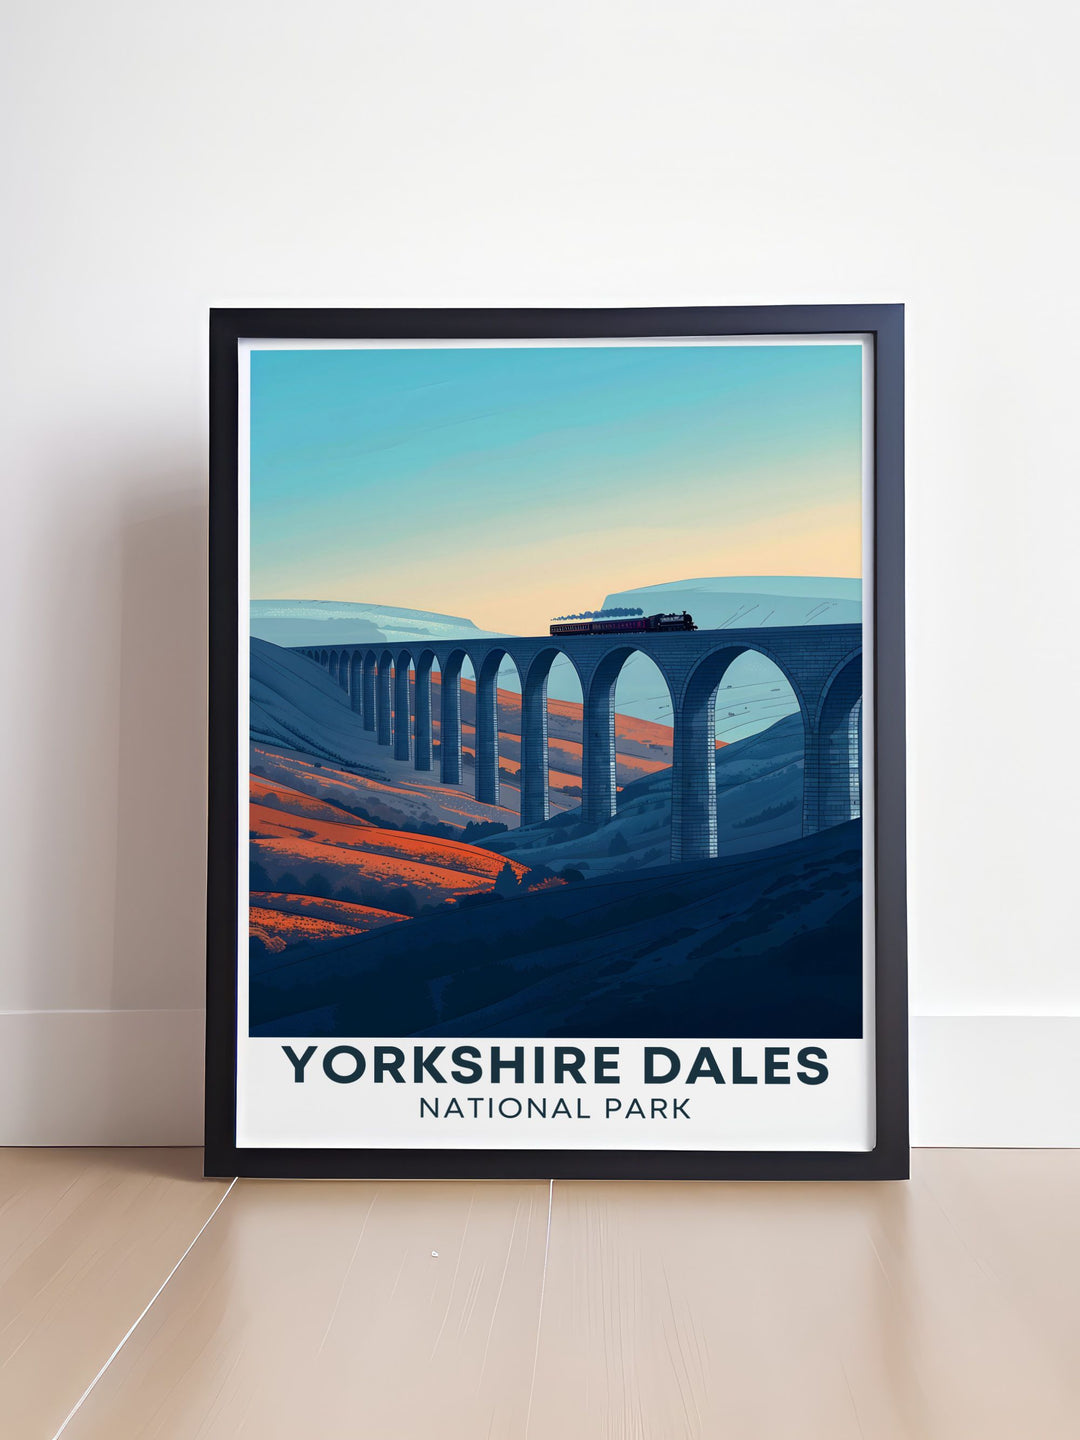 Ribblehead Viaduct Prints showcasing the impressive architecture and scenic views of Englands Yorkshire Dales, perfect for bringing a touch of historic charm to your wall art collection.